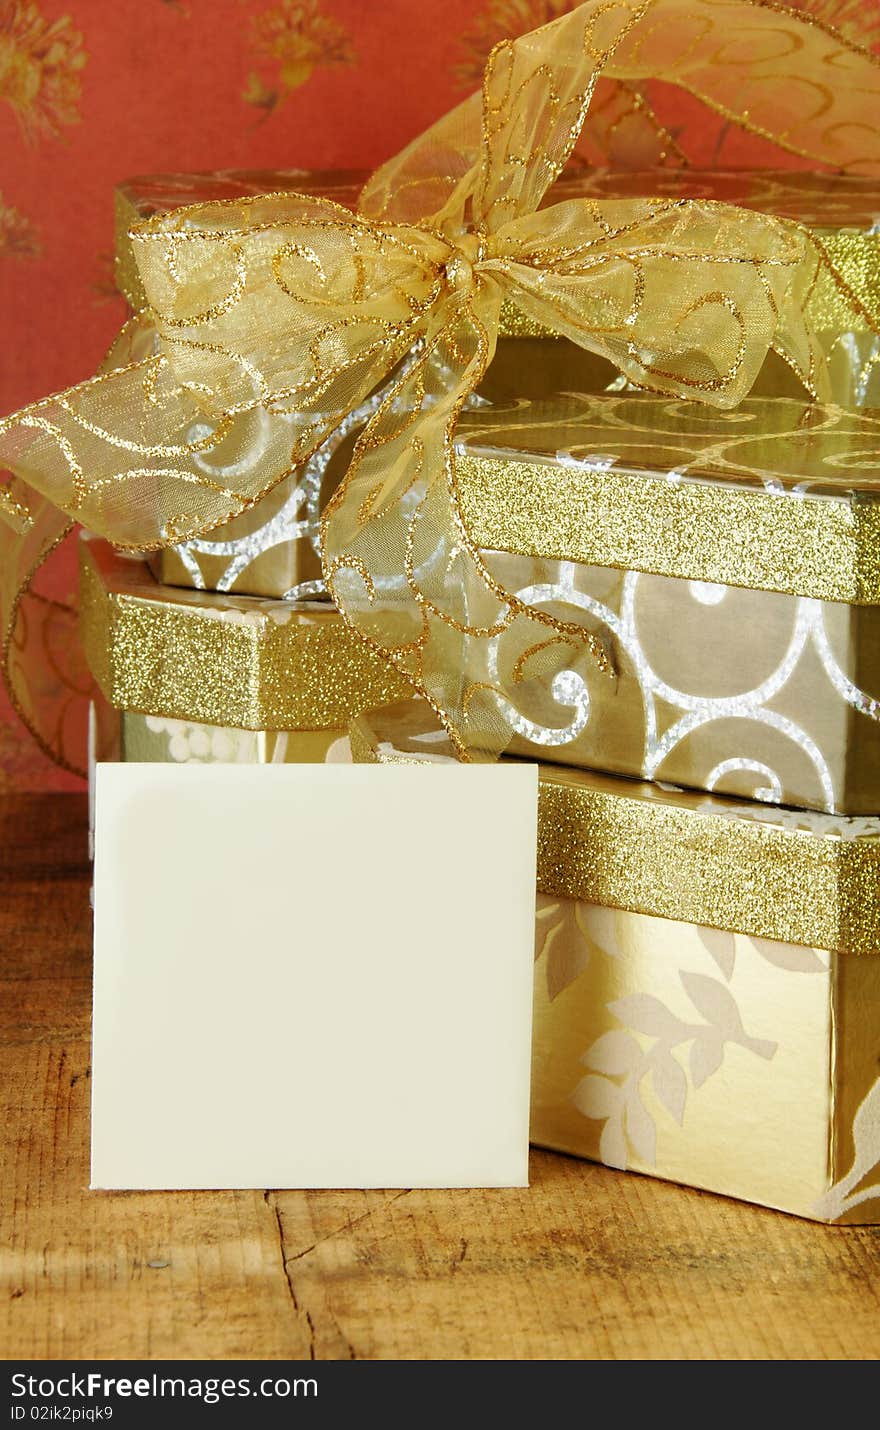 Gift boxes stacked with gold ribbon and gift card blank for your text. Gift boxes stacked with gold ribbon and gift card blank for your text.